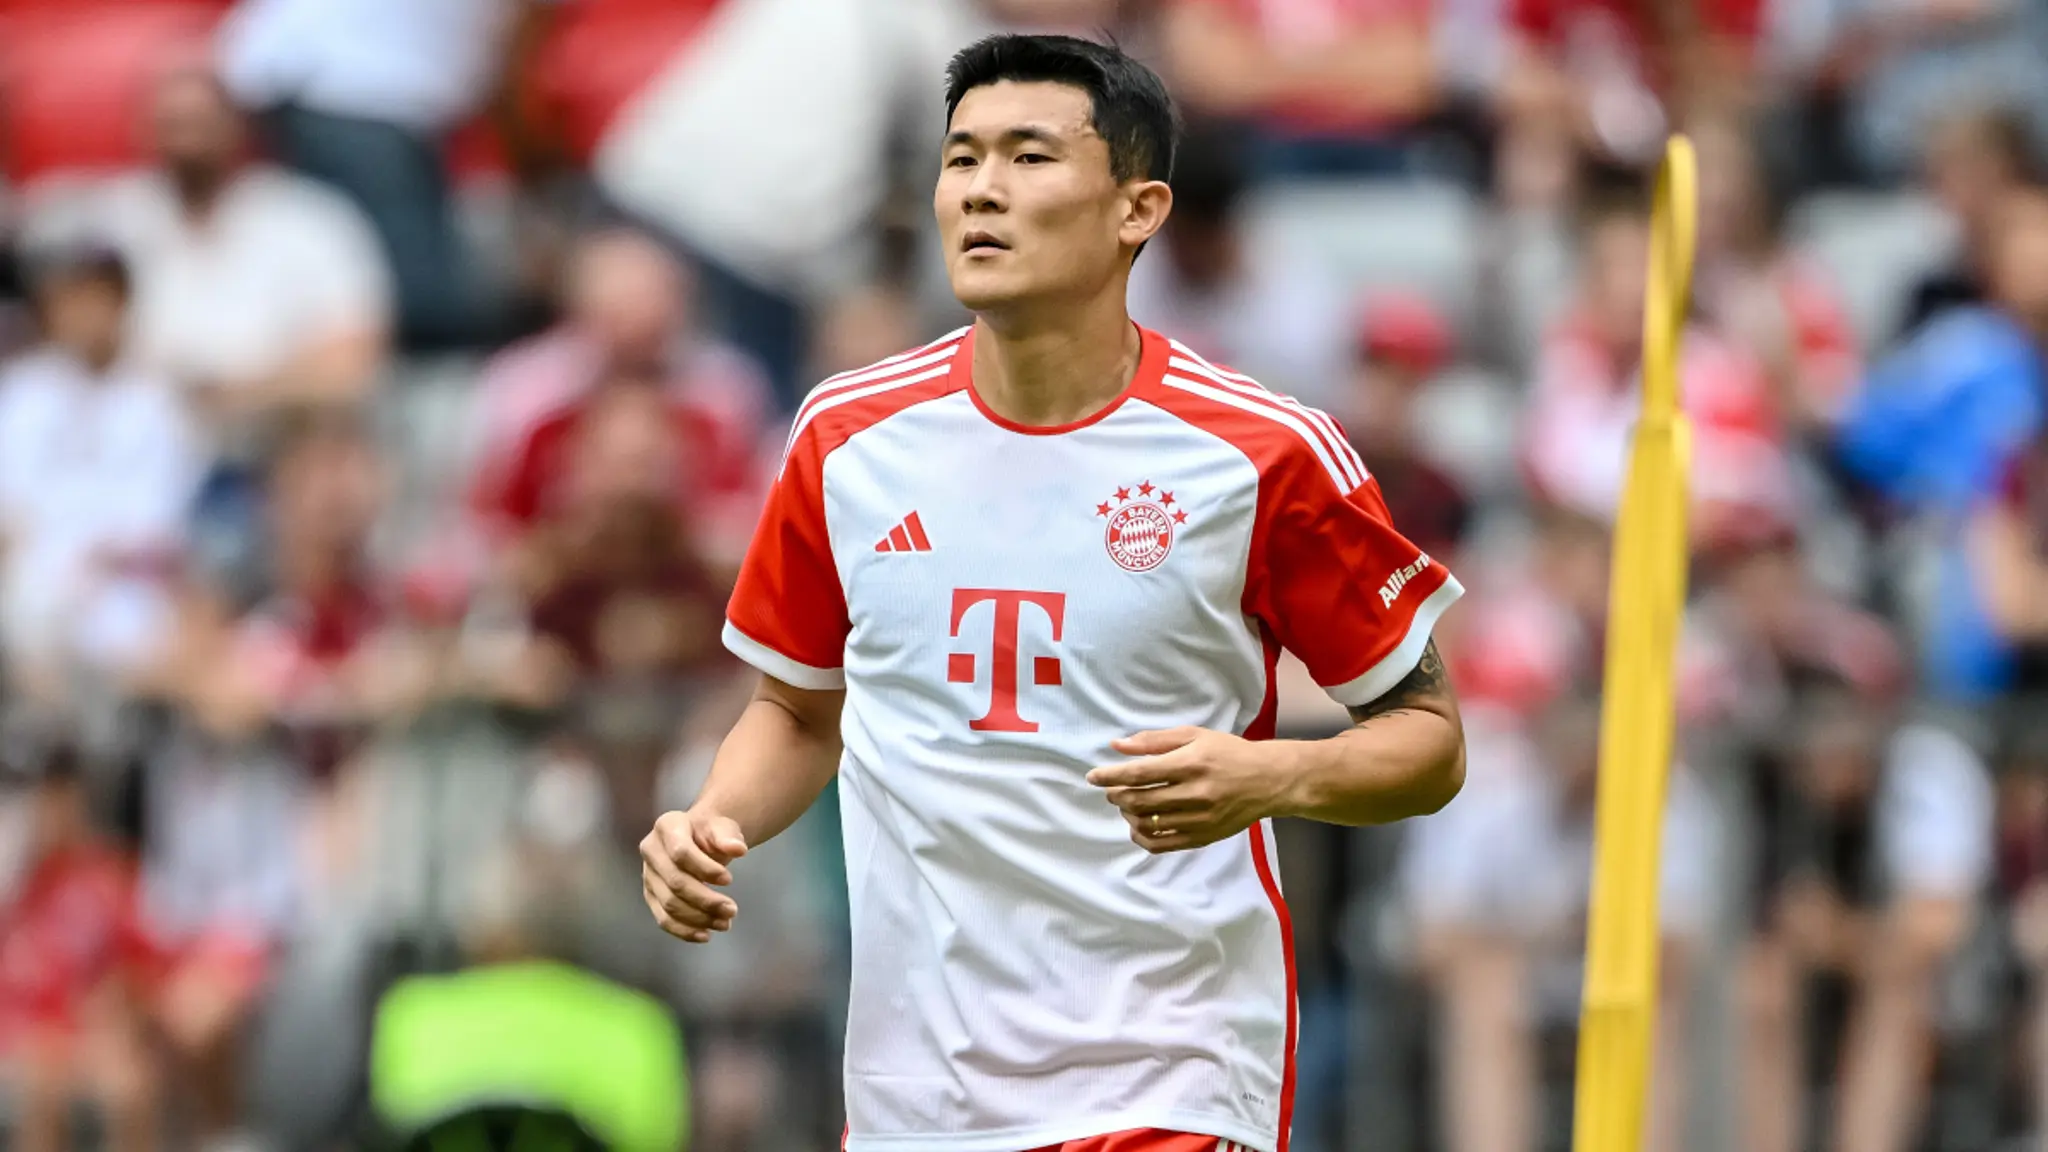 Inter are in the market for a new defender and have earmarked a high-profile one, Kim Min-Jae, should Bayern Munich make him available.